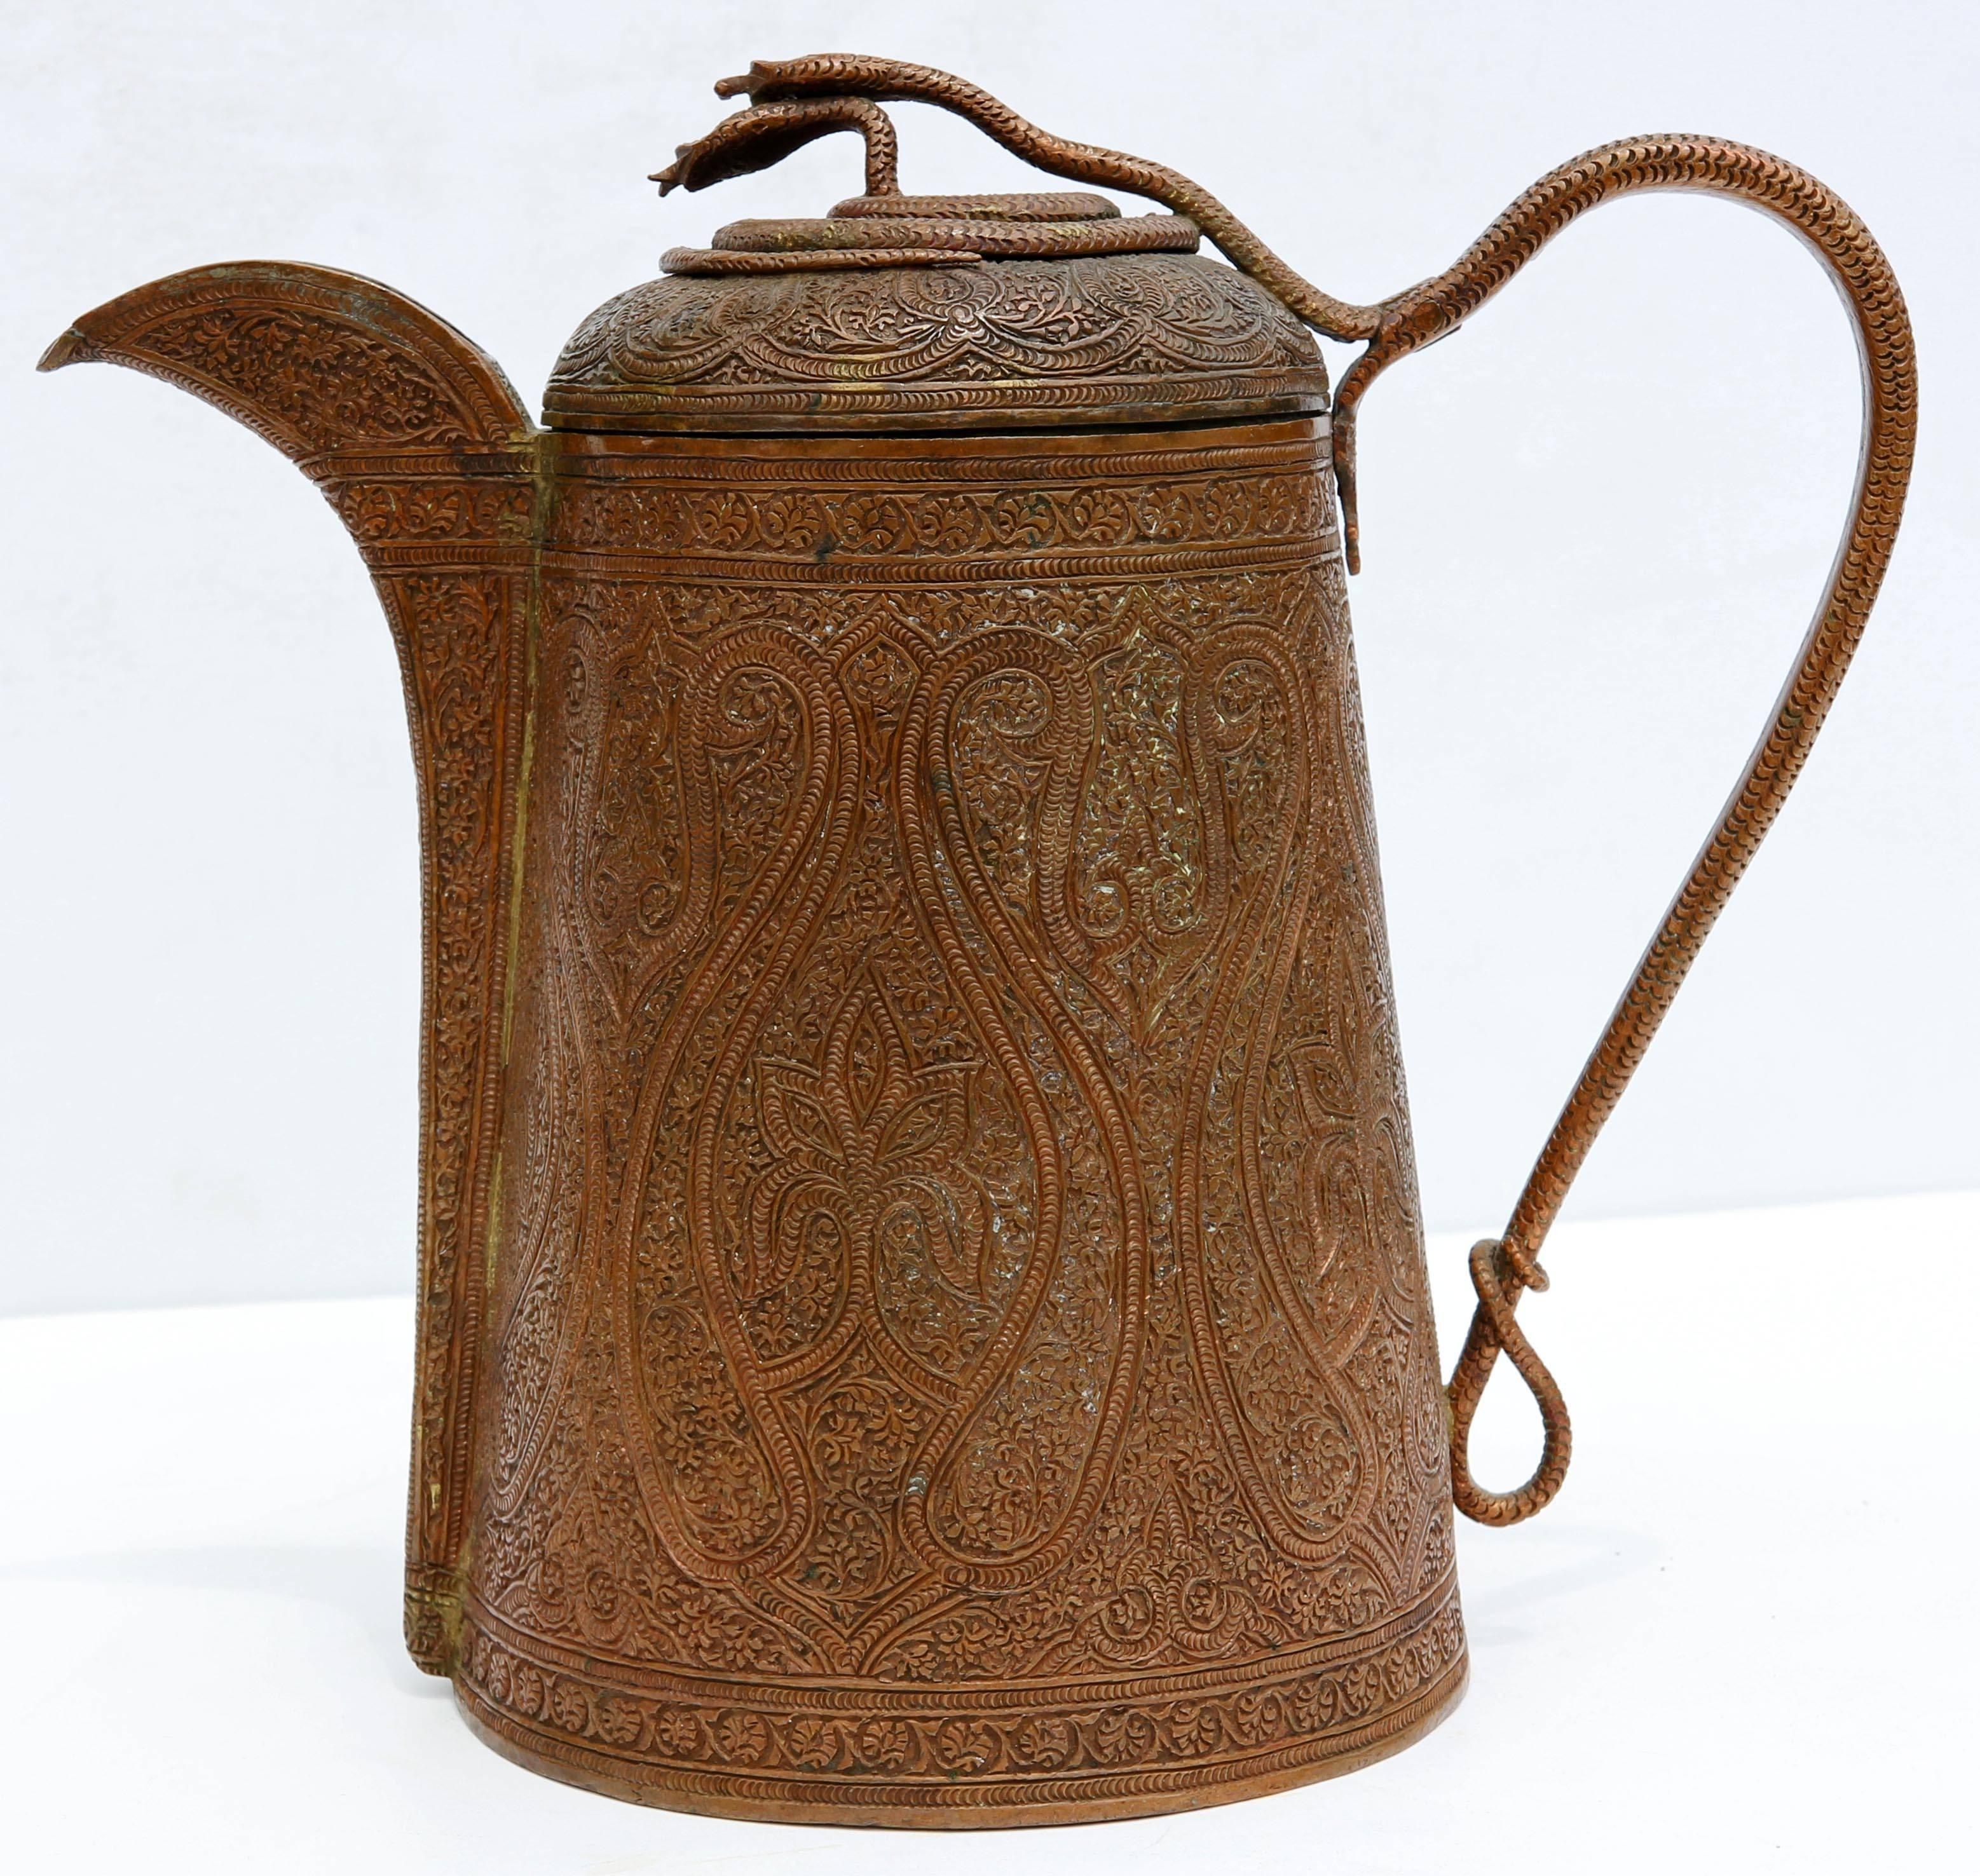 19th century Persian Islamic coffee pot. Engraving work is exceptional.